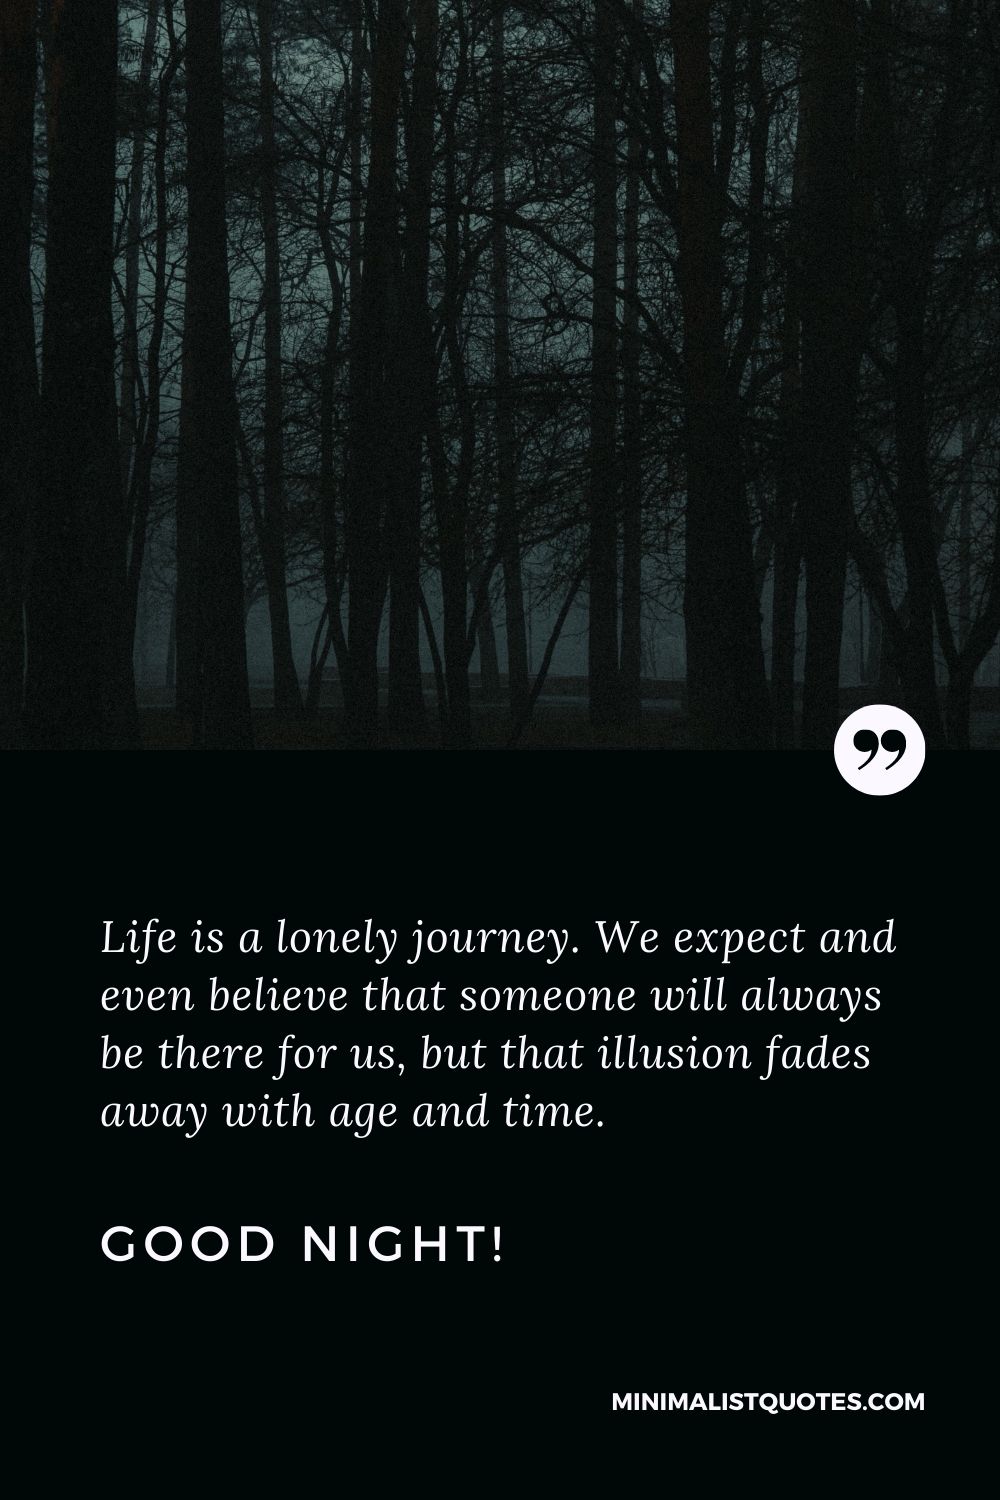 Good Night Quote, Wish & Message With Image: Life is a lonely journey. We expect and even believe that someone will always be there for us, but that illusion fades away with age and time. Good Night!